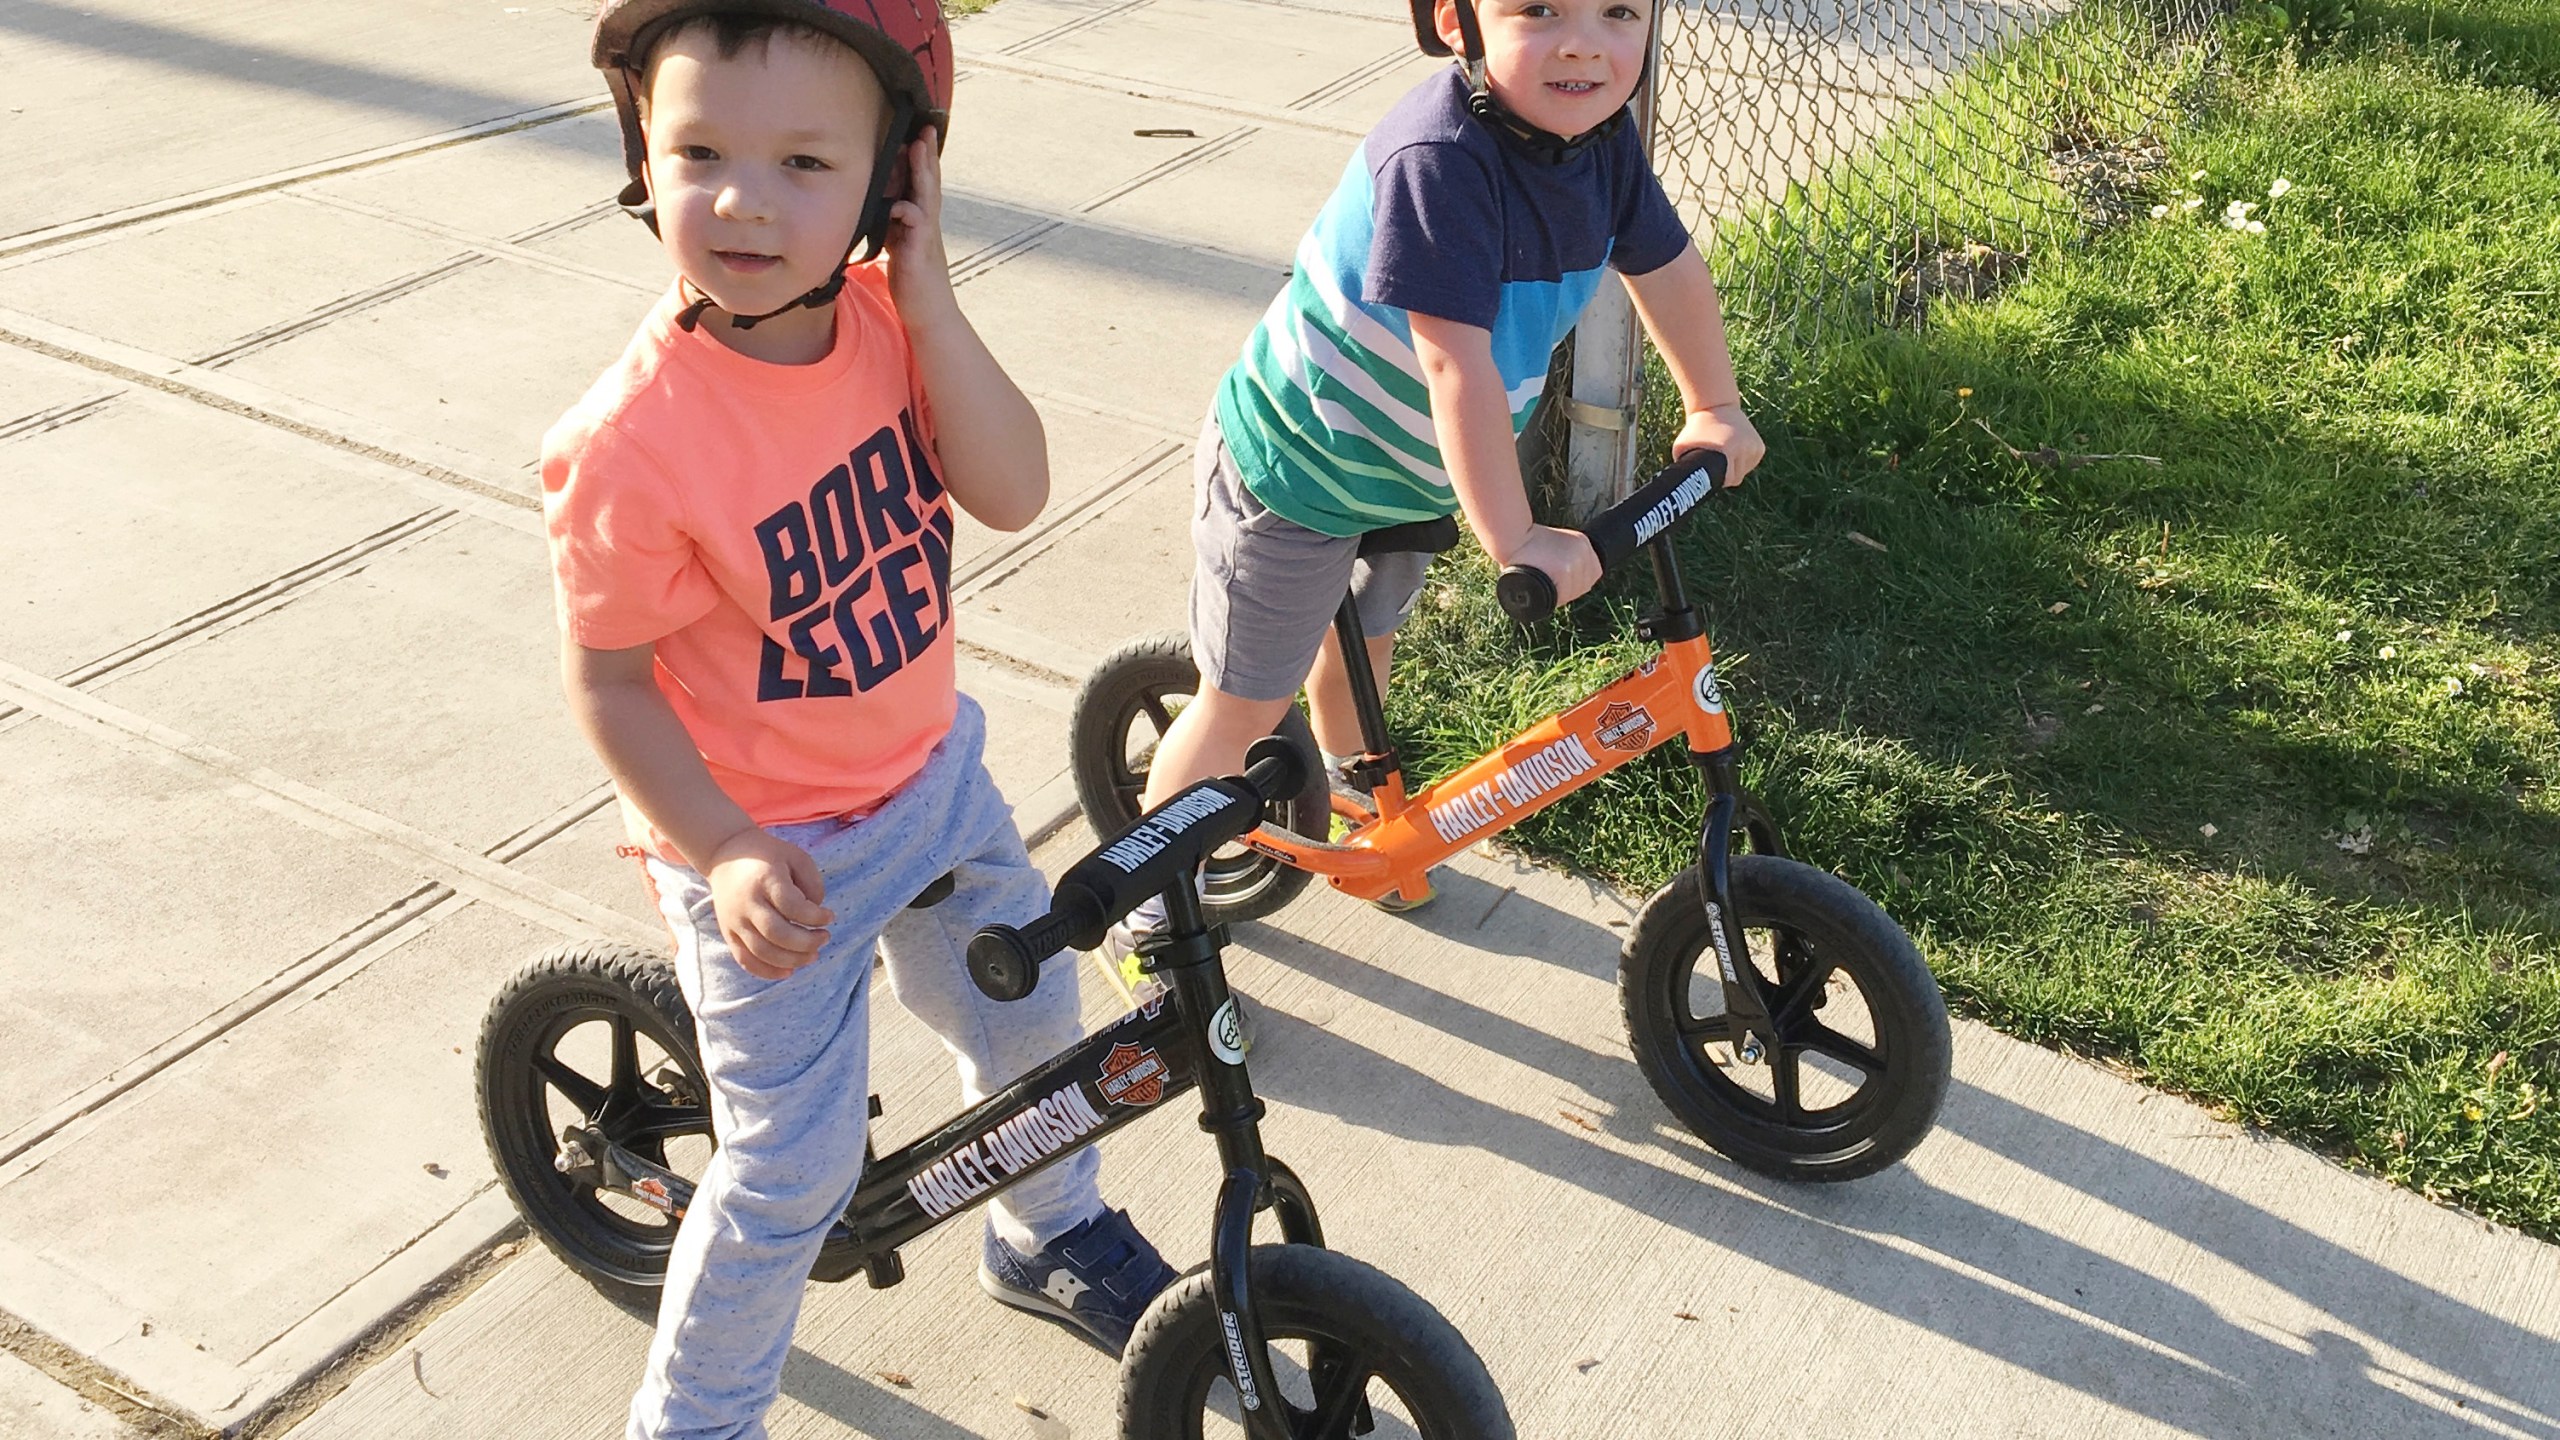 Jackson, left, and Owen Pezalla, both 4, appear on balance bicycles in Seattle on July 1, 2017. Experts recommend starting with those so-called balance bikes at a younger-than-expected age, possibly even less than a year old. (Annie Pezalla via AP)